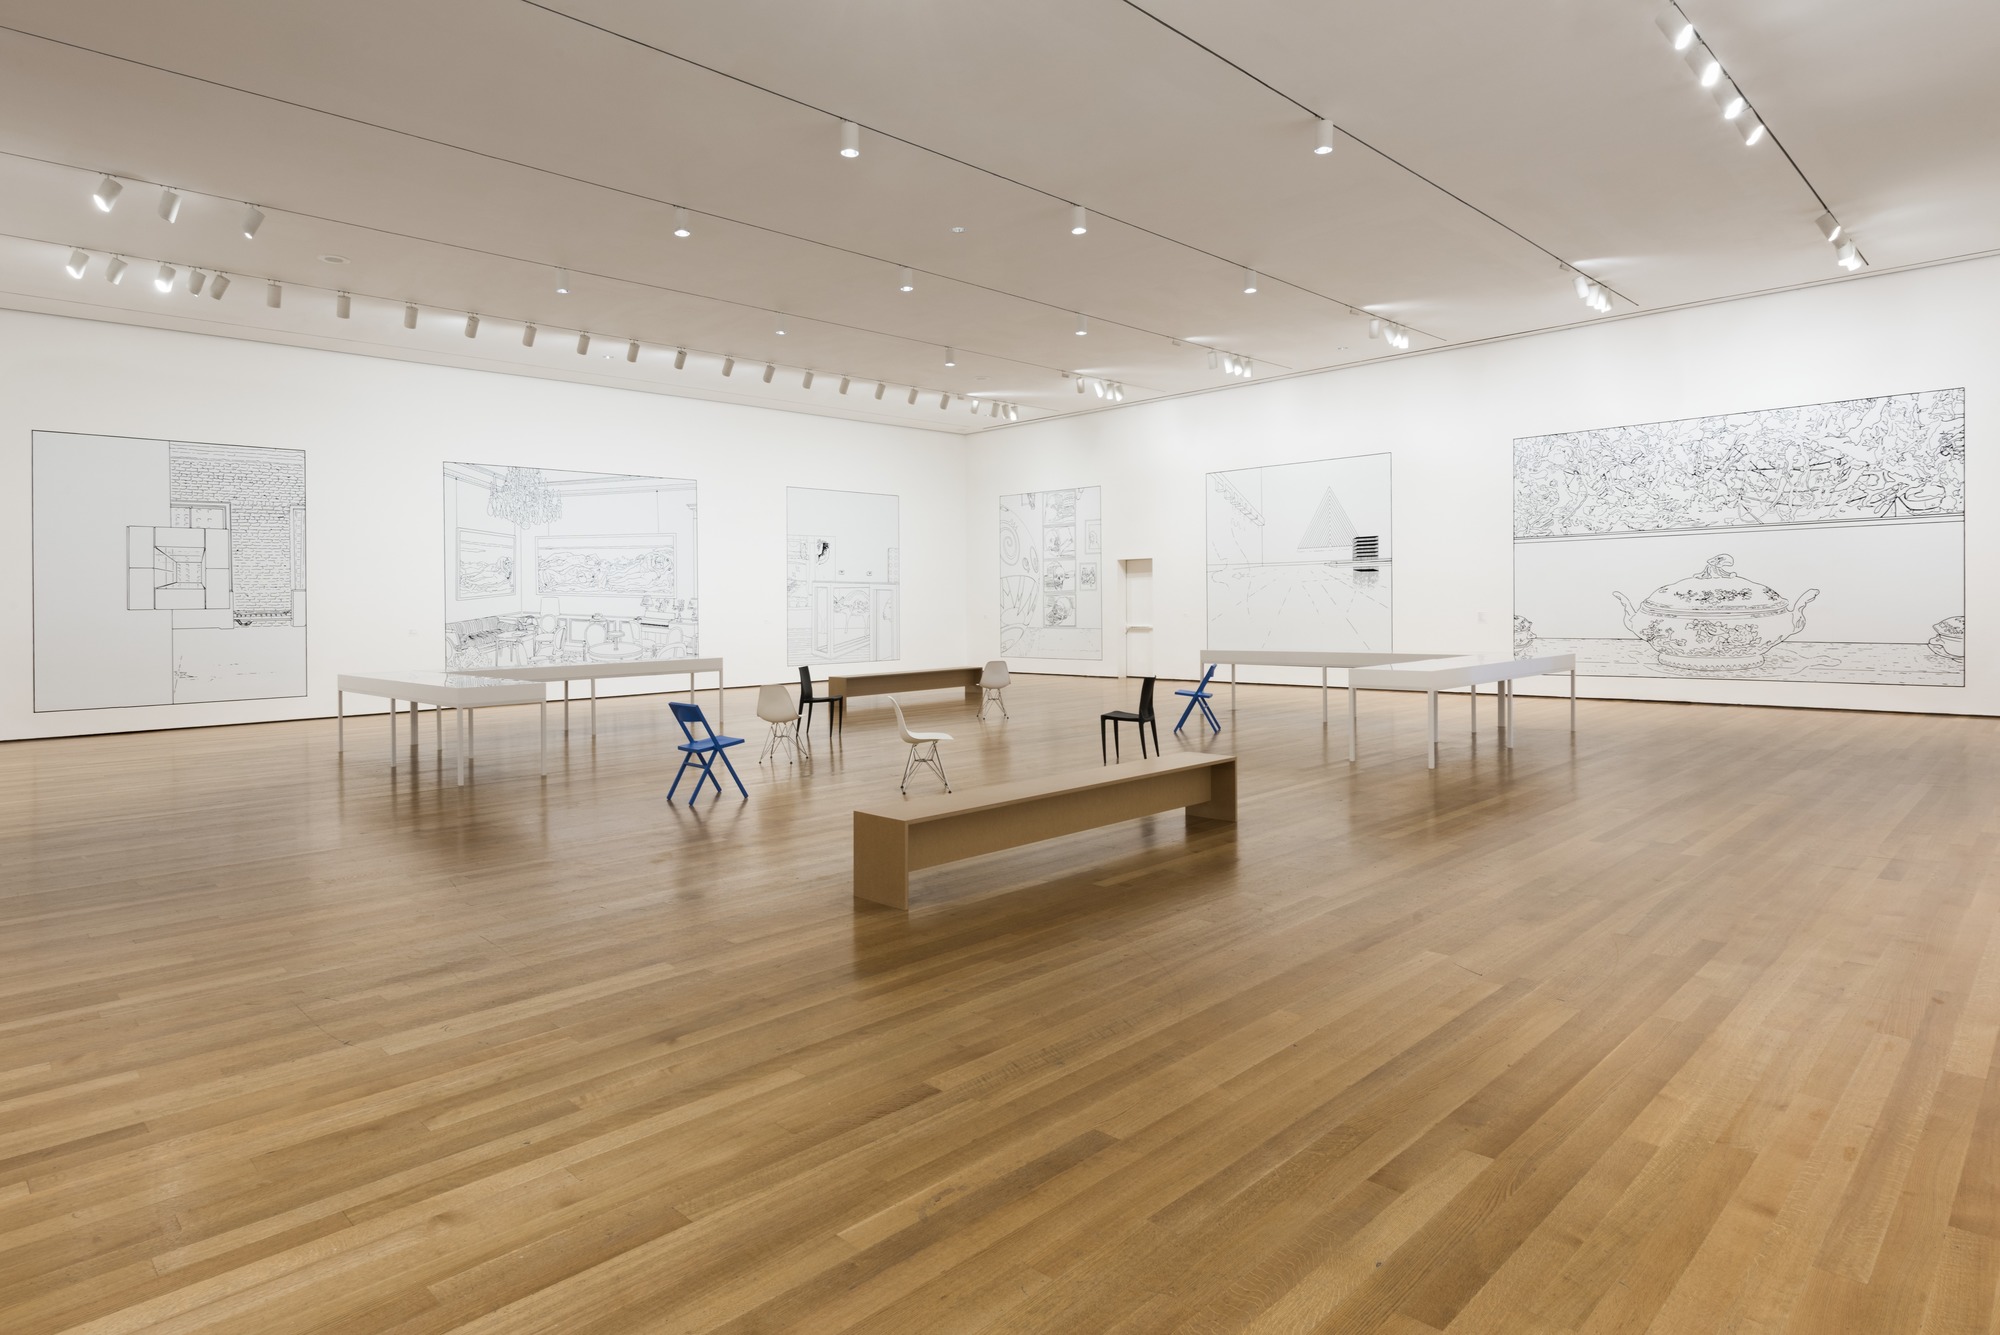 Installation view of 'Louise Lawler: WHY PICTURES NOW' at The Museum of Modern Art